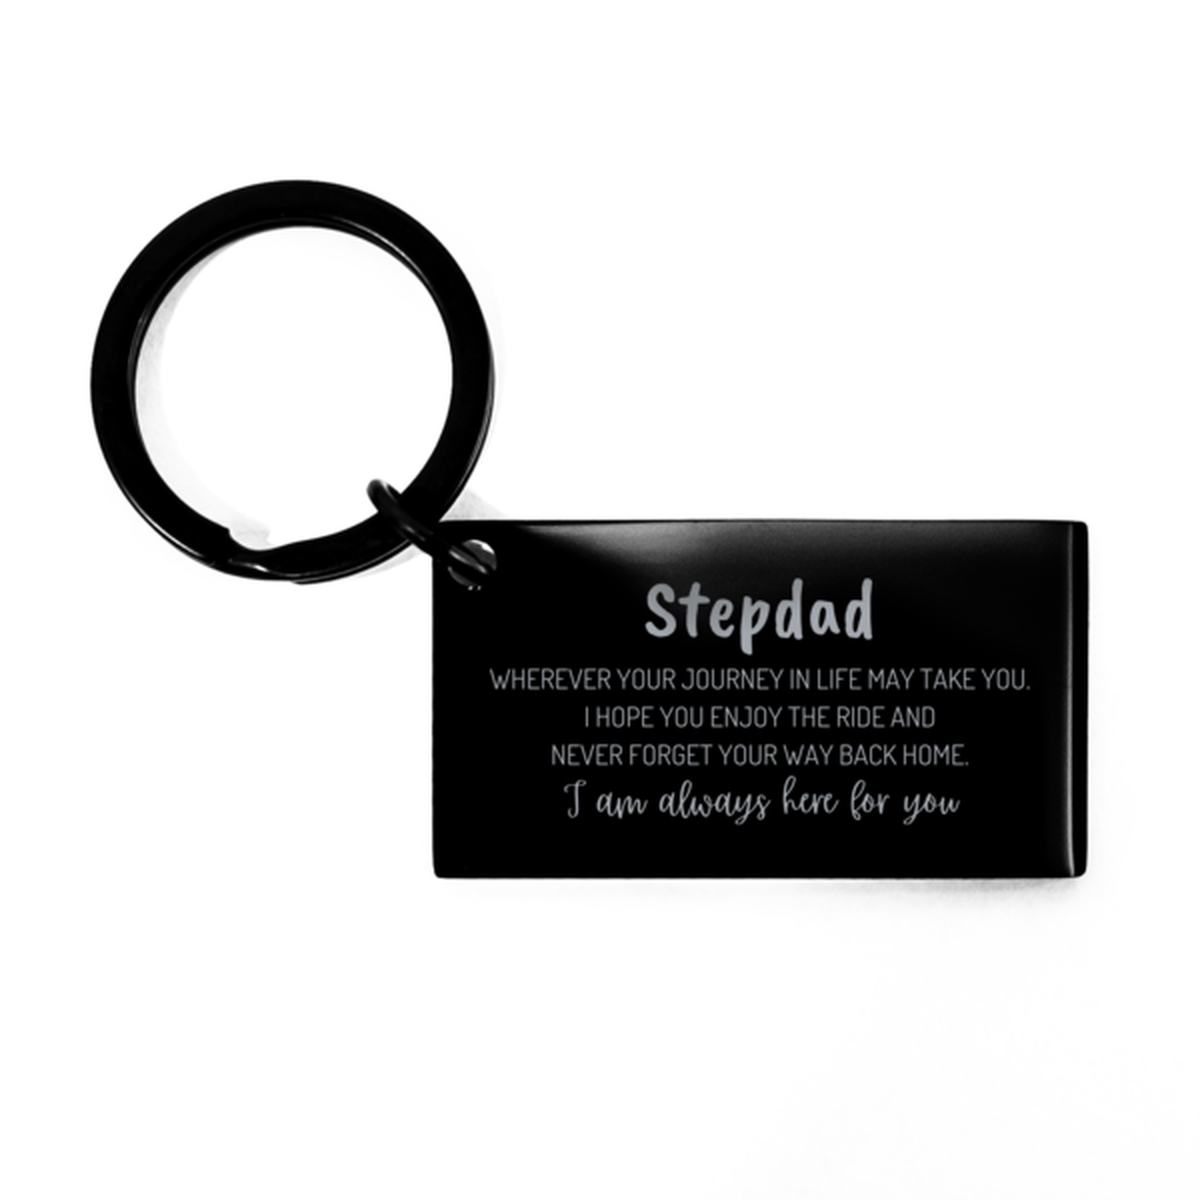 Stepdad wherever your journey in life may take you, I am always here for you Stepdad Keychain, Awesome Christmas Gifts For Stepdad, Stepdad Birthday Gifts for Men Women Family Loved One